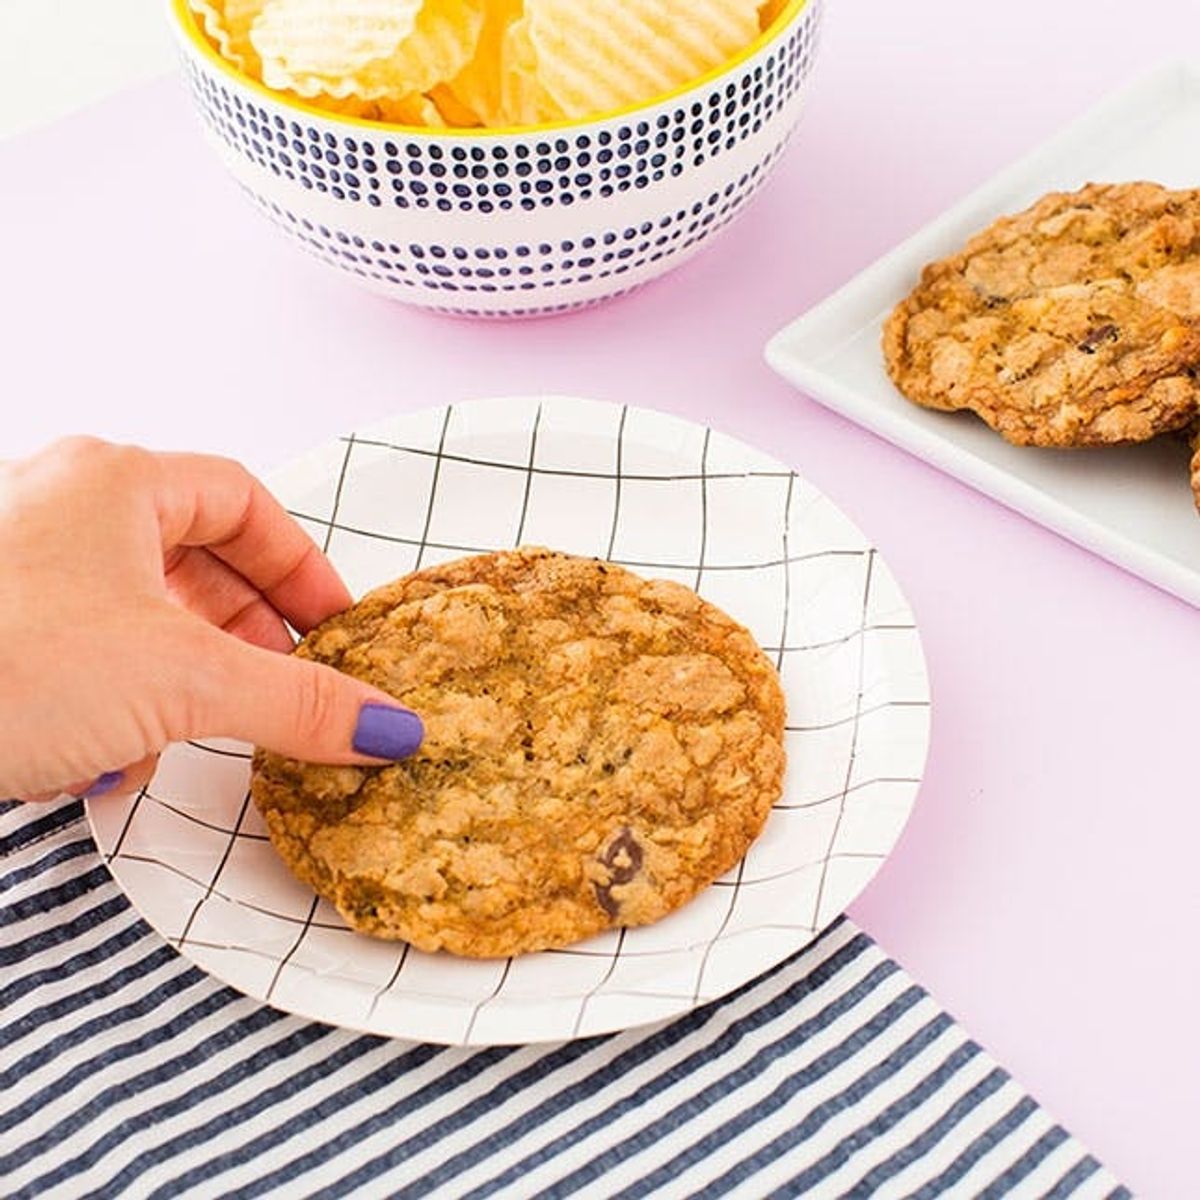 How to Make Everything but the Kitchen Sink Cookies